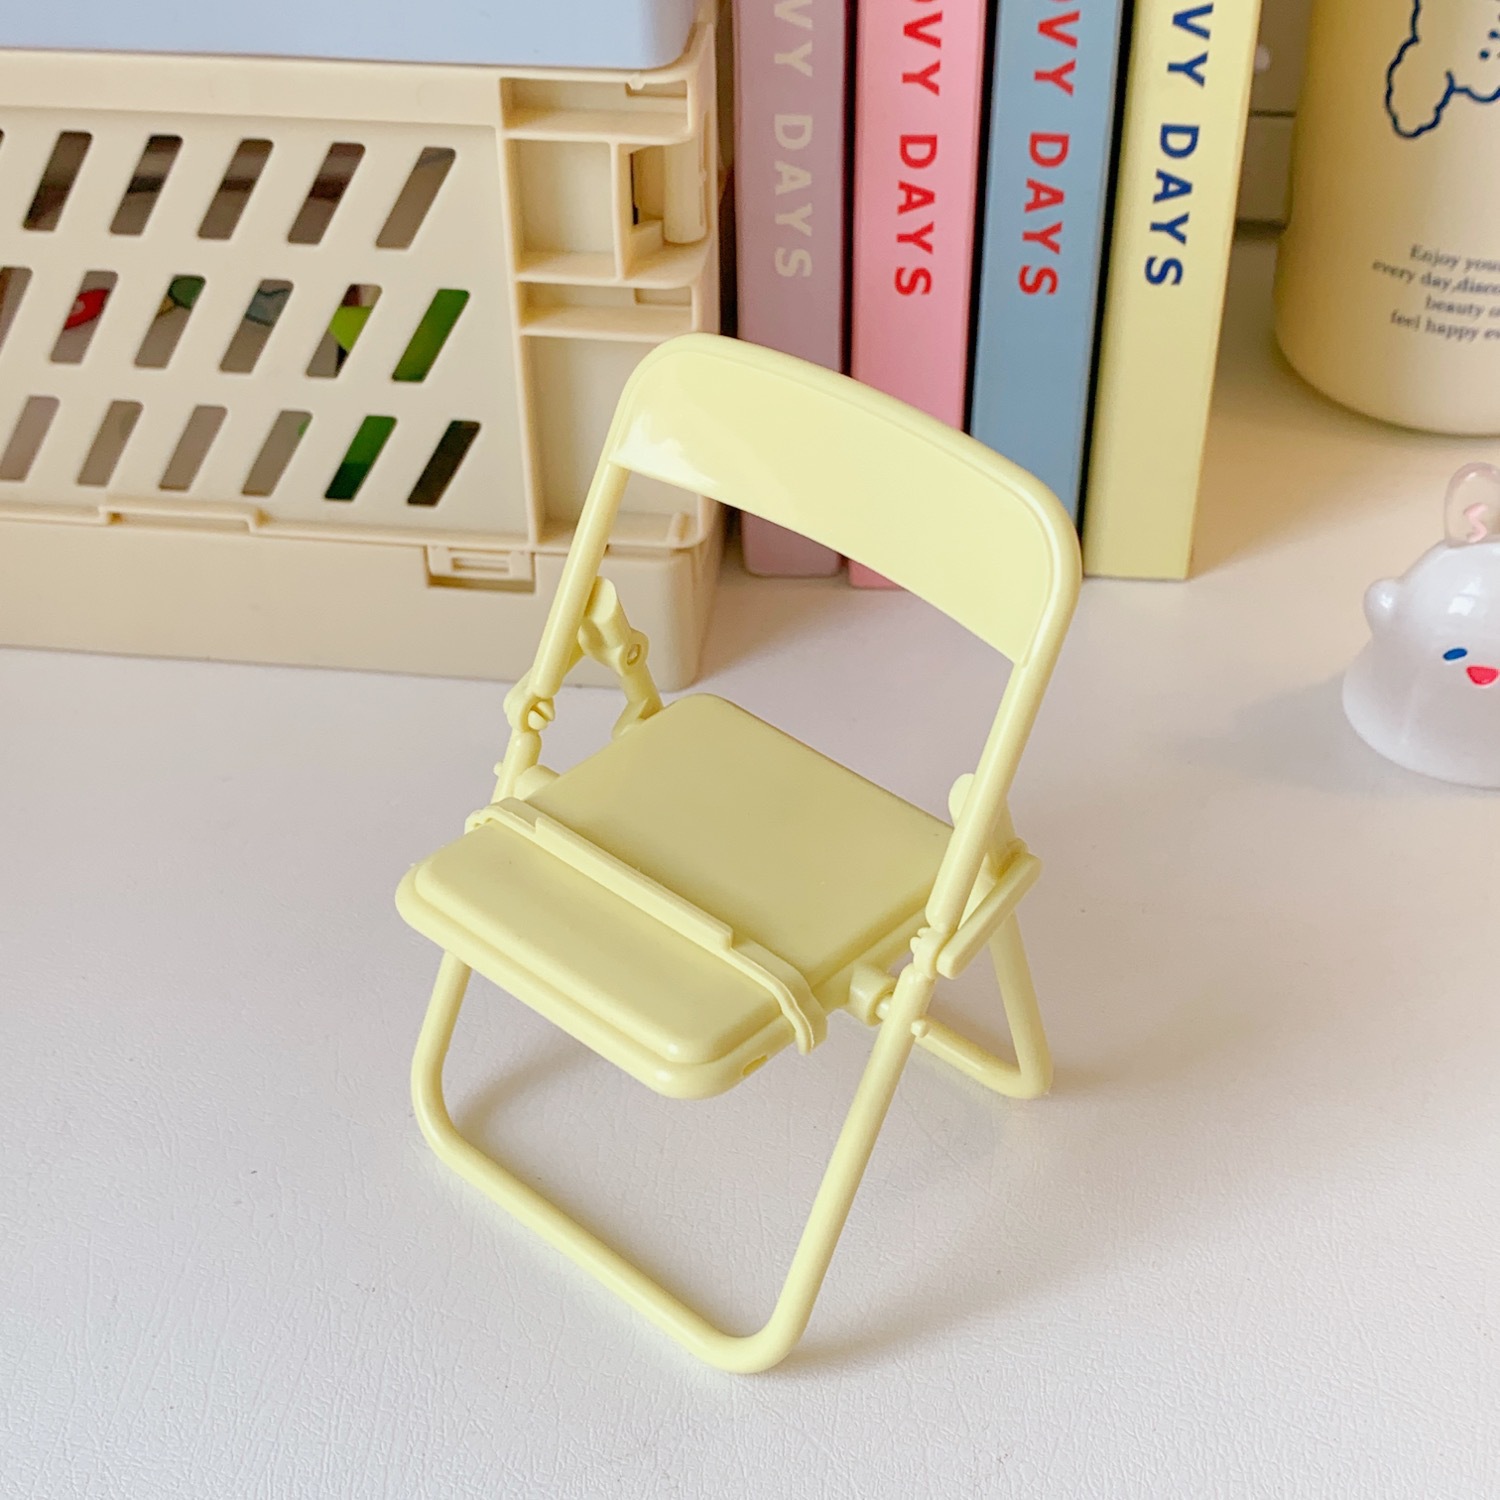 Cute Small Chair Mobile Phone Holder Creative Desktop Phone Holder Foldable Live Streaming Watching TV Lazy Binge-watching Props